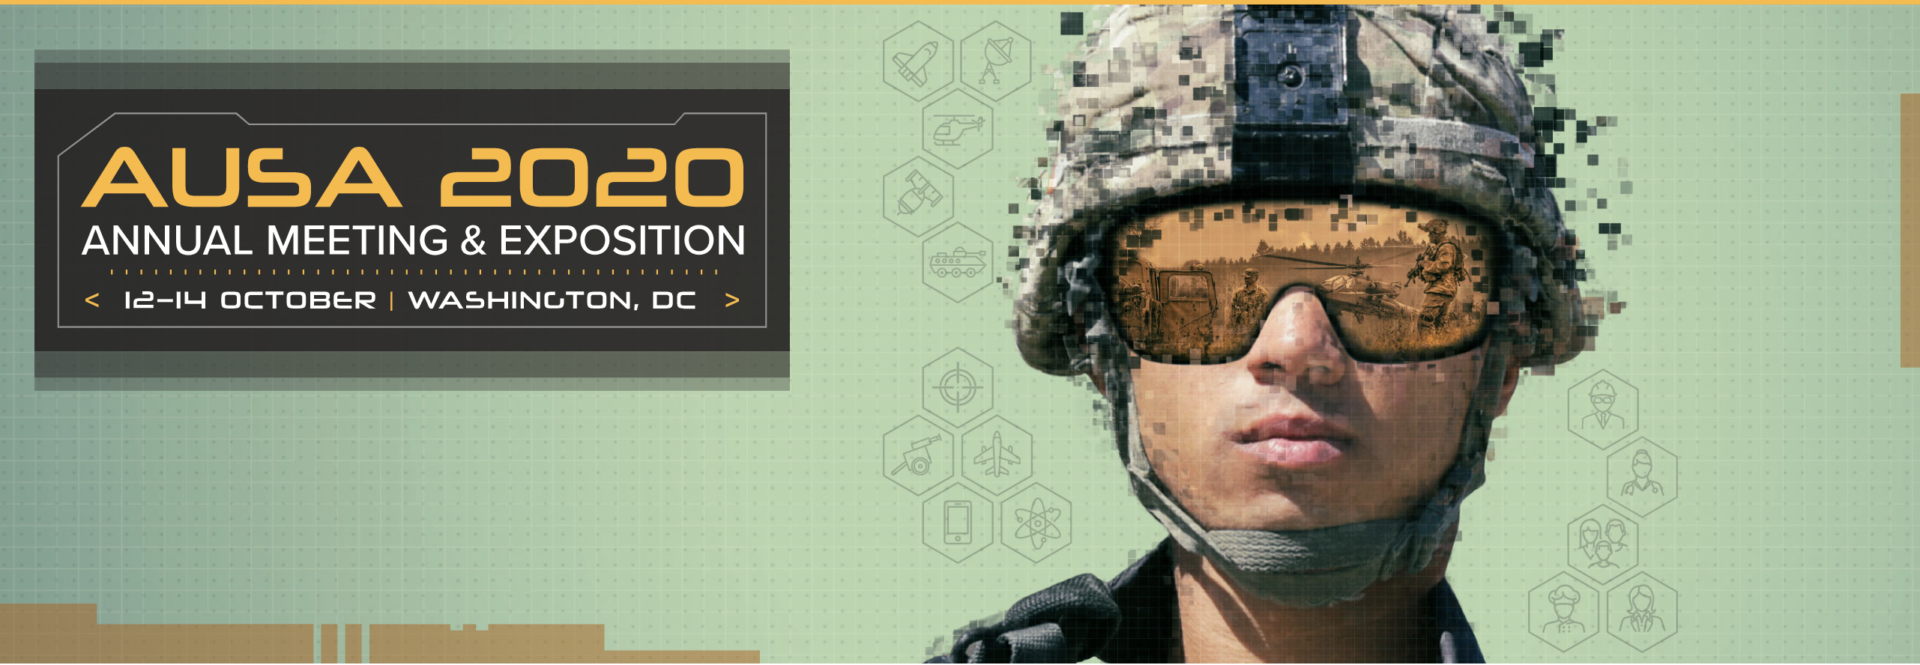 AUSA 2020 Annual Meeting & Exposition event poster. 12-14 October, Washington, D.C.